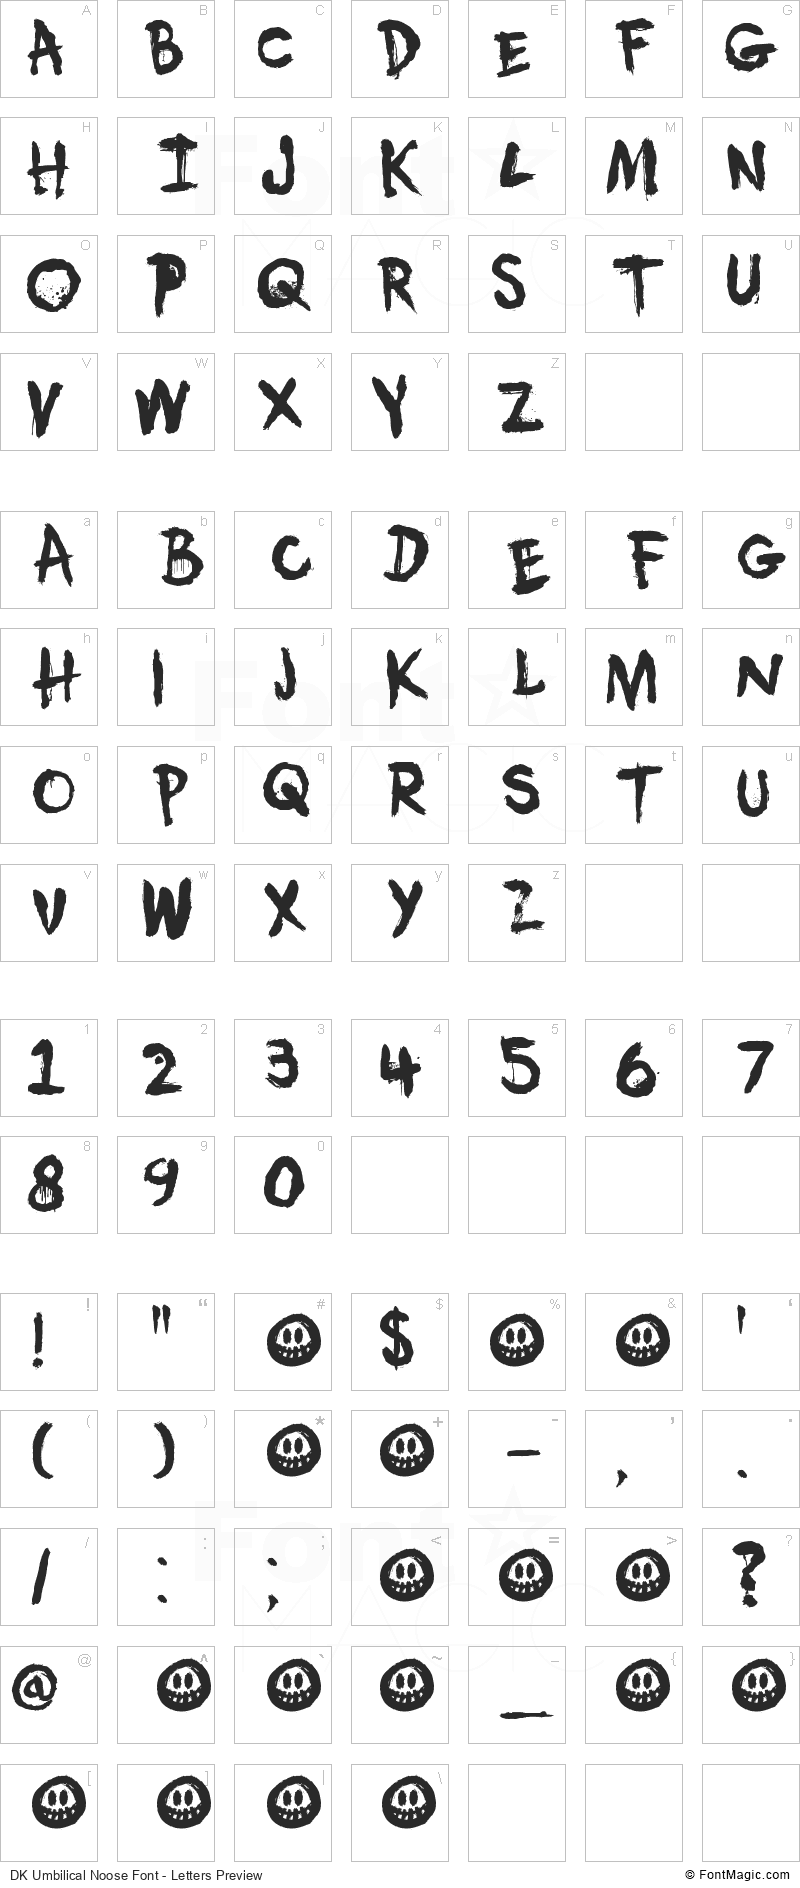 DK Umbilical Noose Font - All Latters Preview Chart